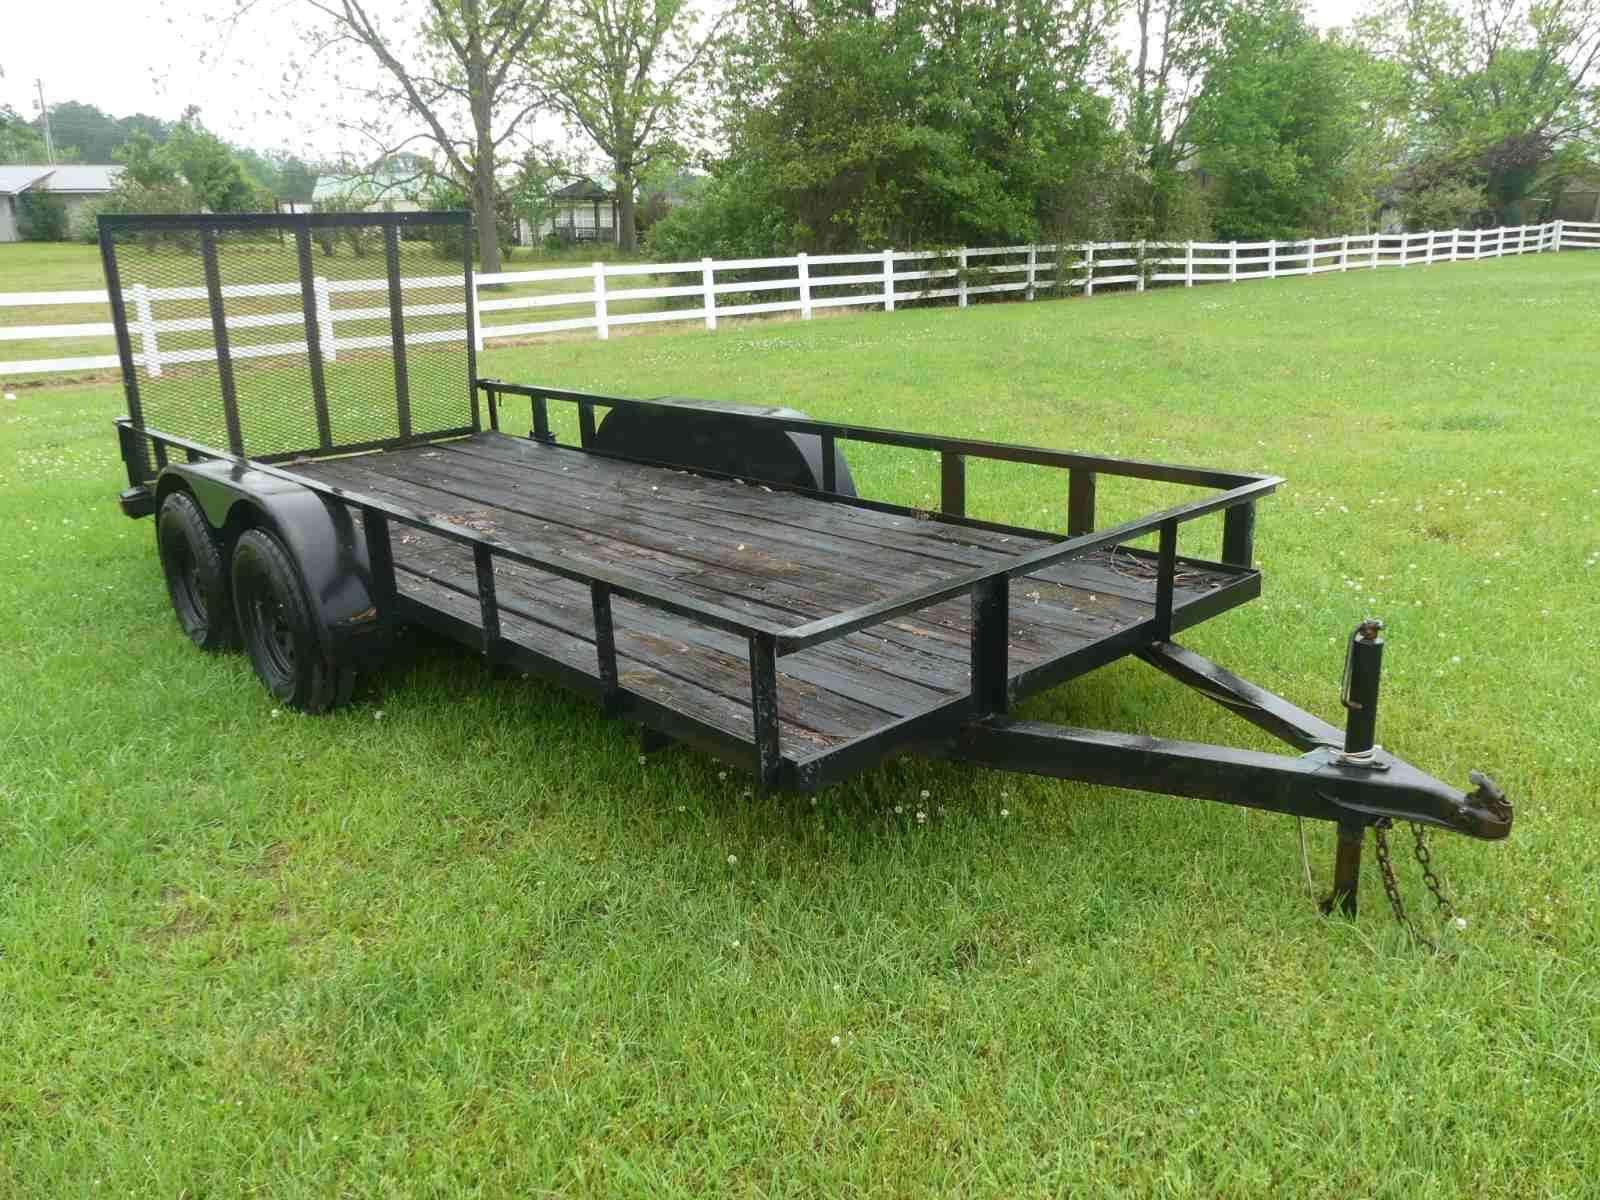 Trailer (No Title - Bill of Sale Only): T/A, Bumper-pull, Ramp